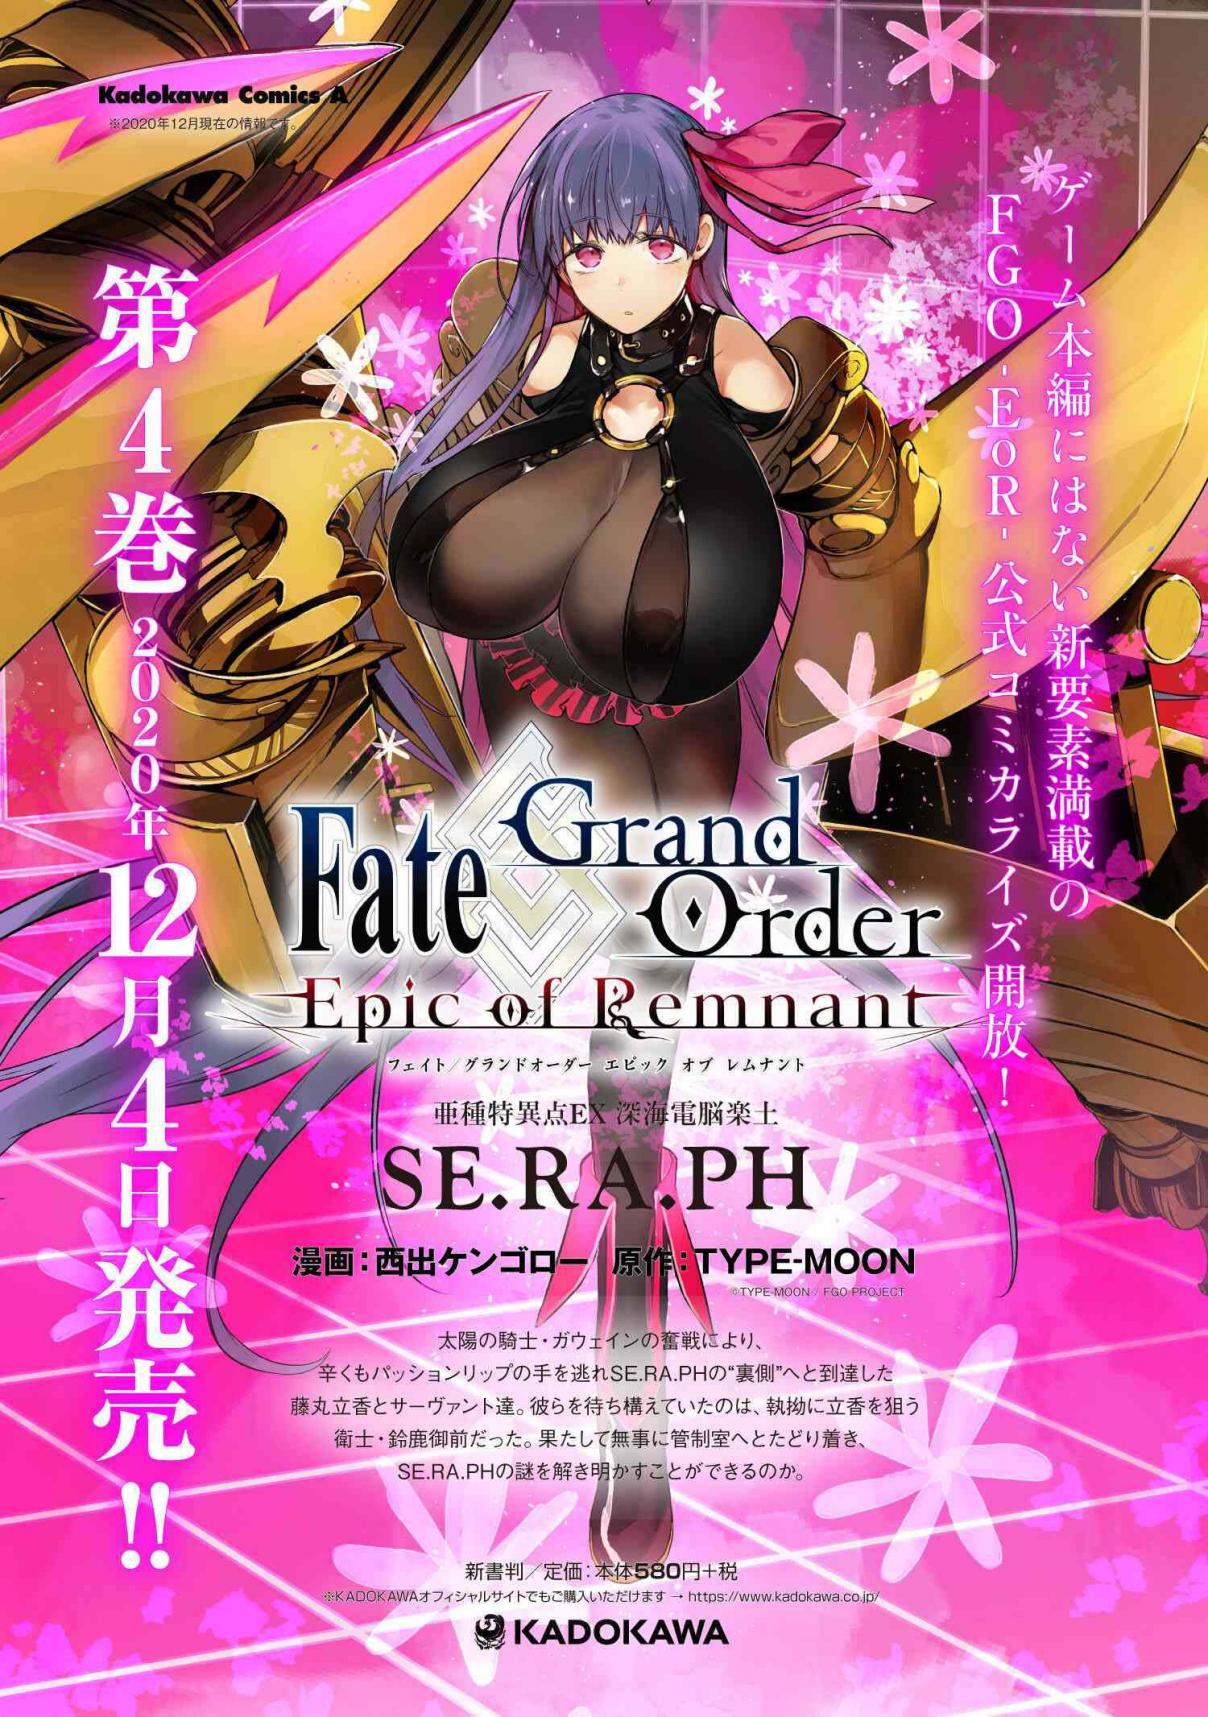 Fate/Grand Order -Epic of Remnant- Deep Sea Cyber-Paradise, SE.RA.PH 19.1